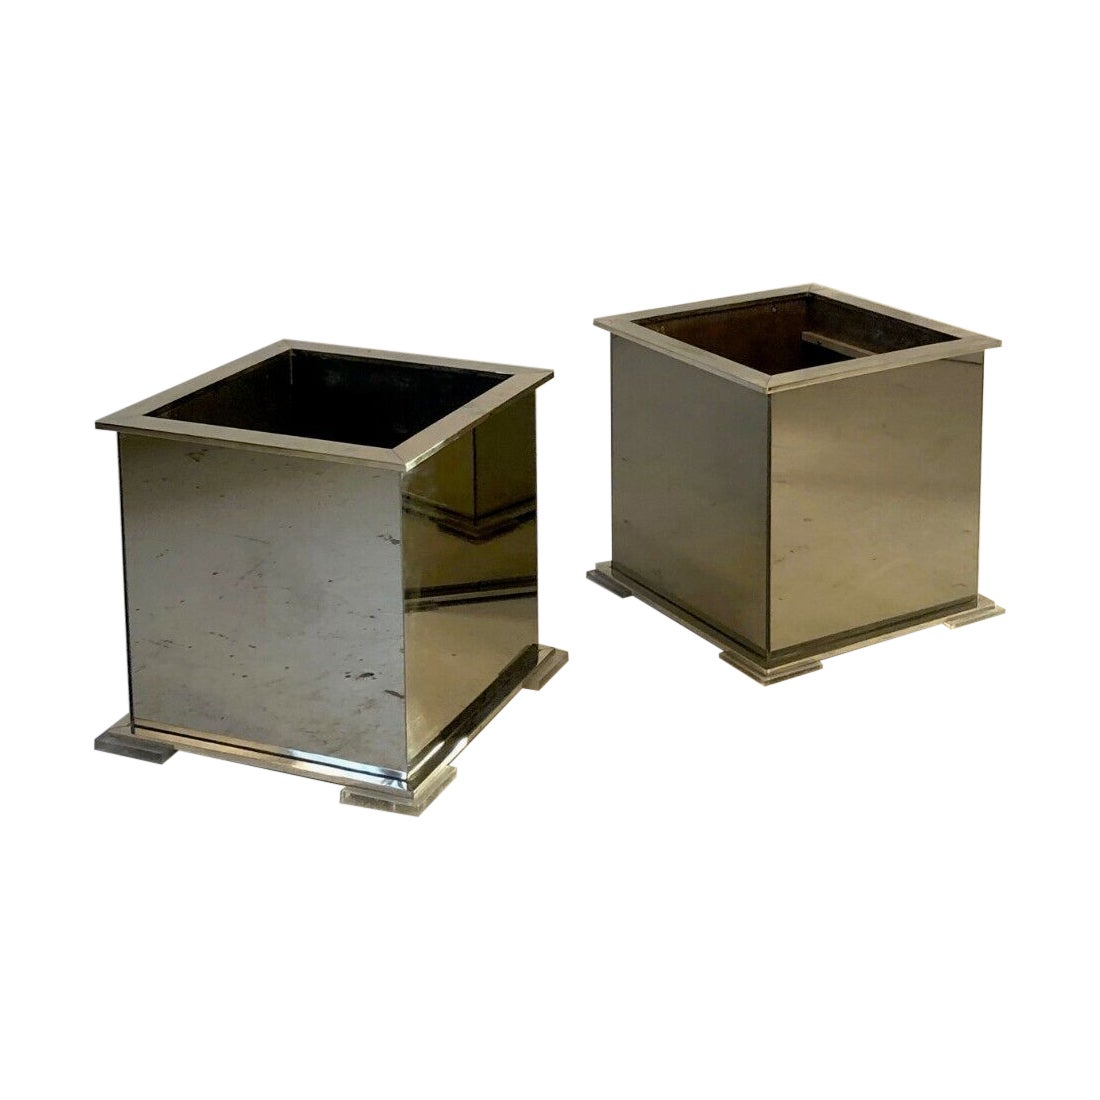 A Pair of POST-MODERN PLANTERS by GUY LEFEVRE for MAISON JANSEN, France 1970 For Sale